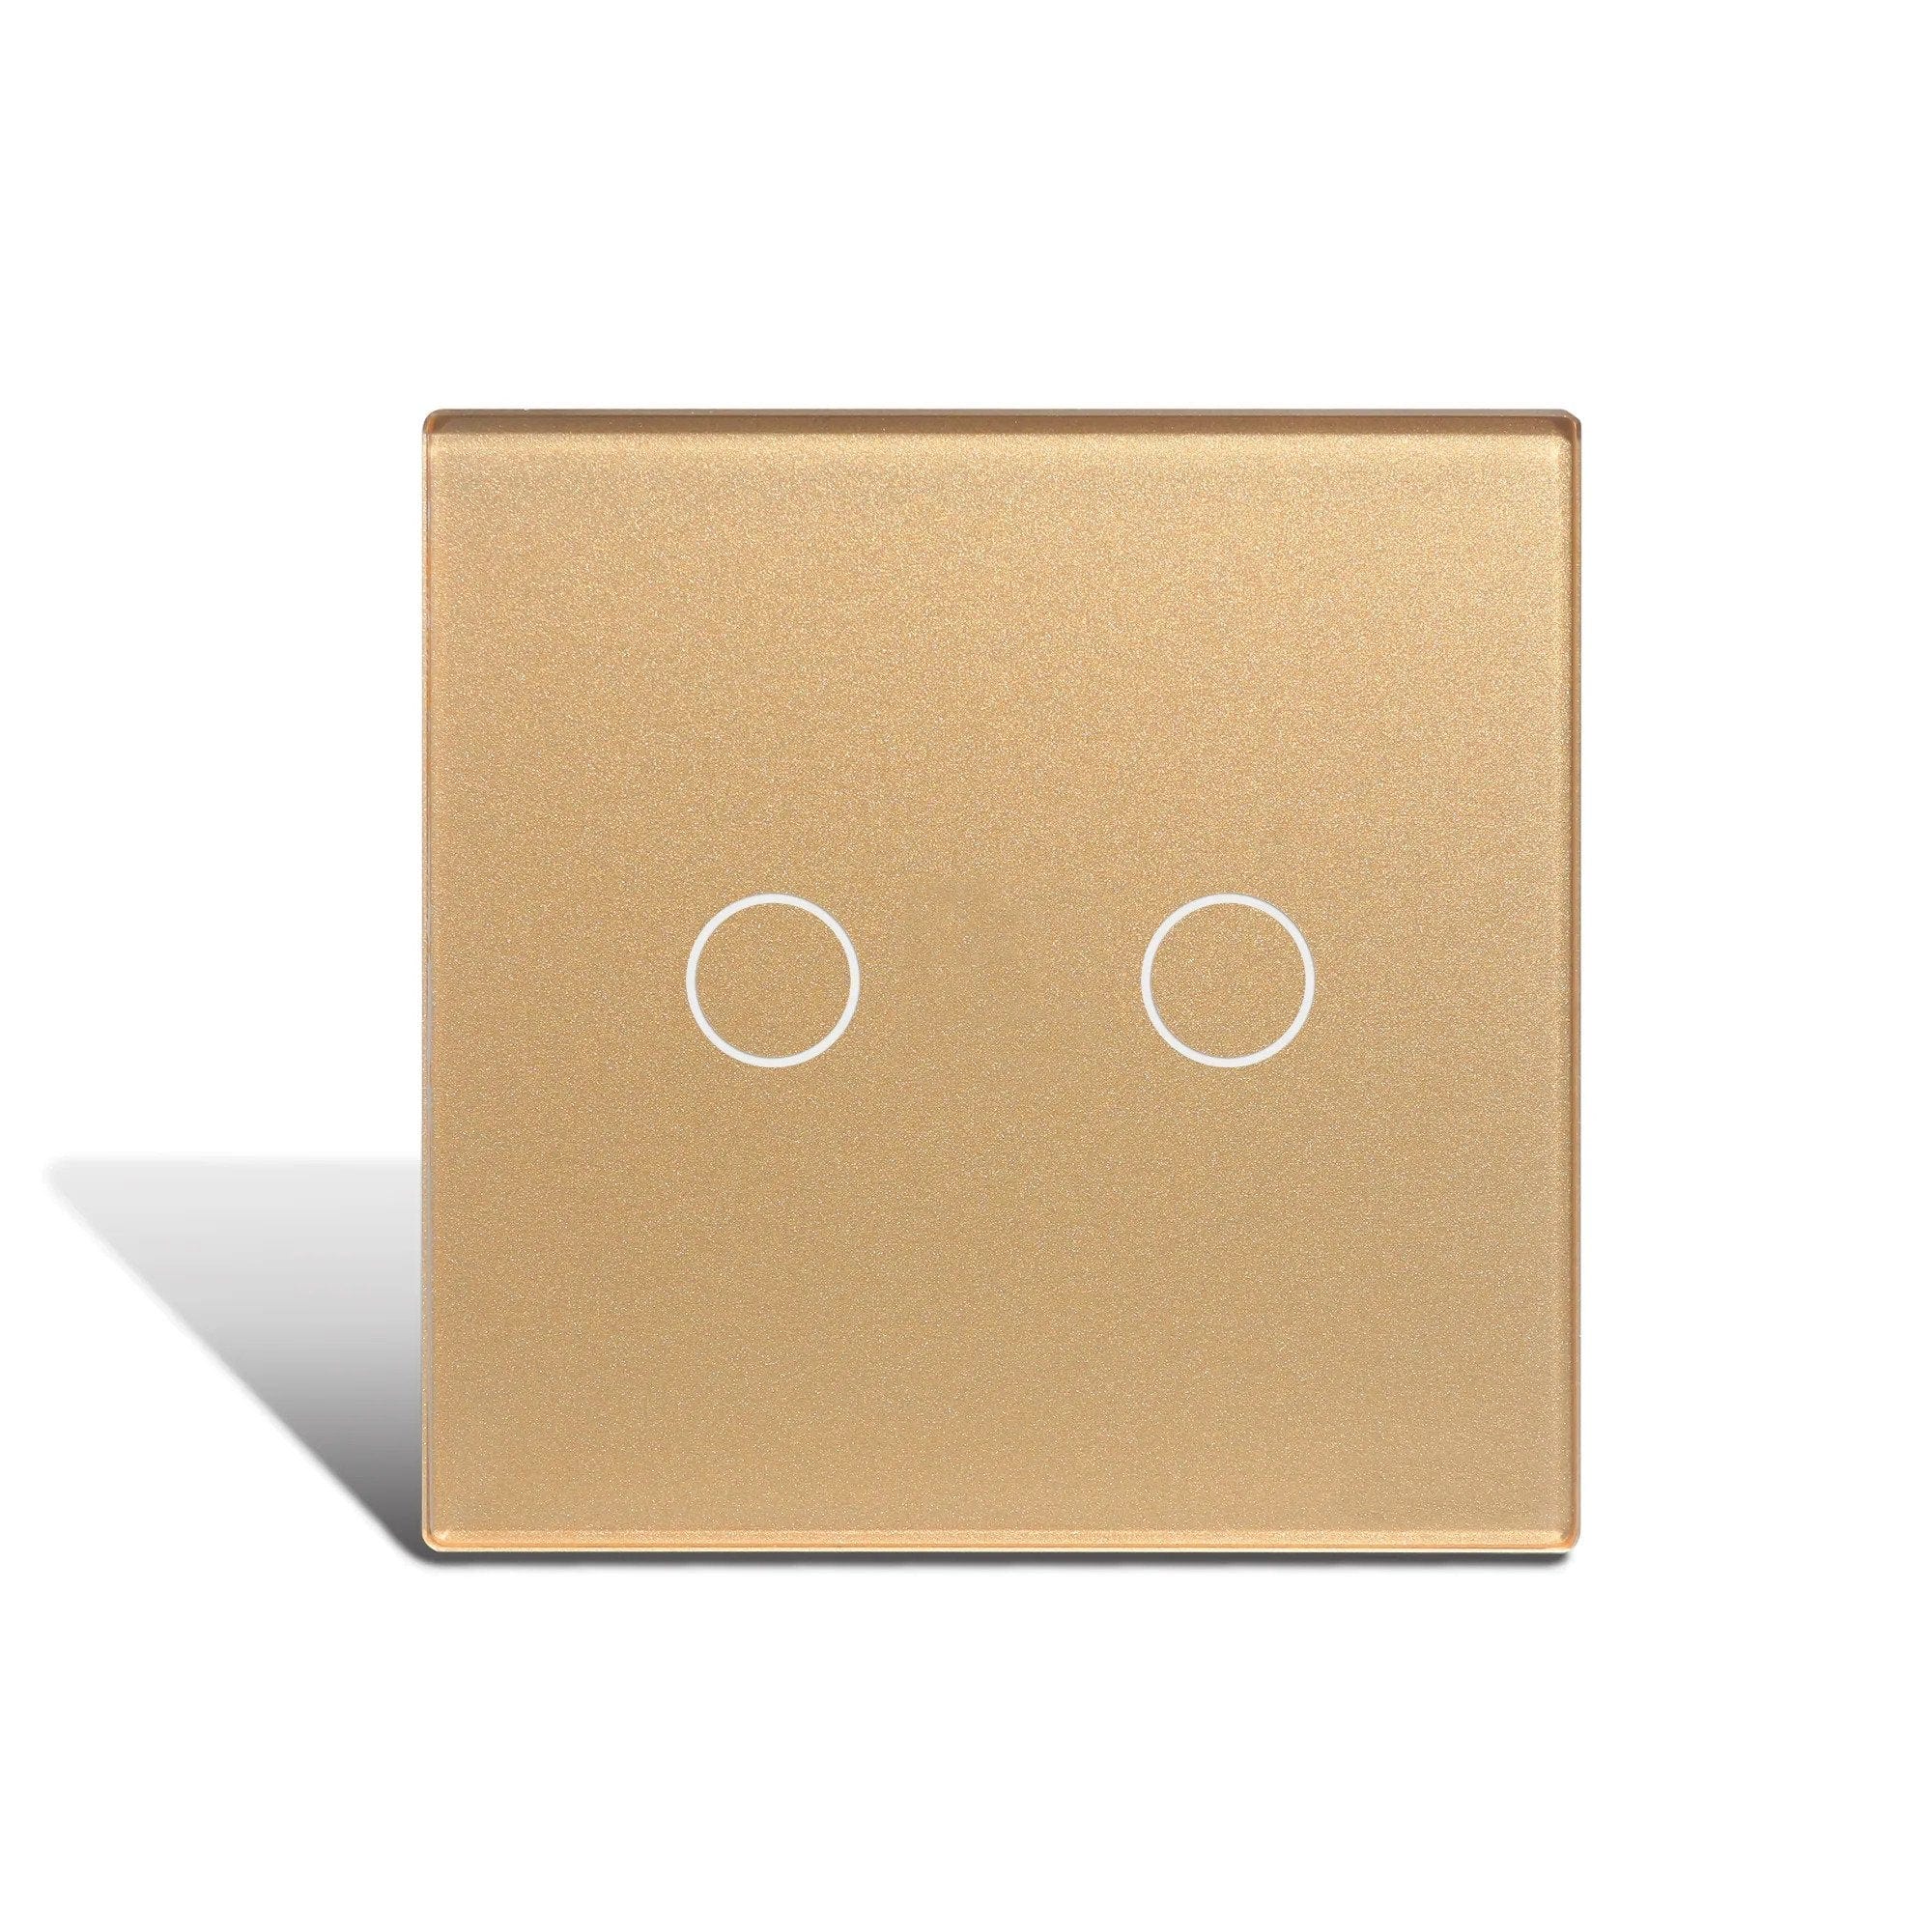 Smart Wi-Fi 1-Gang Light Switch | Supply Master | Accra, Ghana Switches & Sockets Buy Tools hardware Building materials